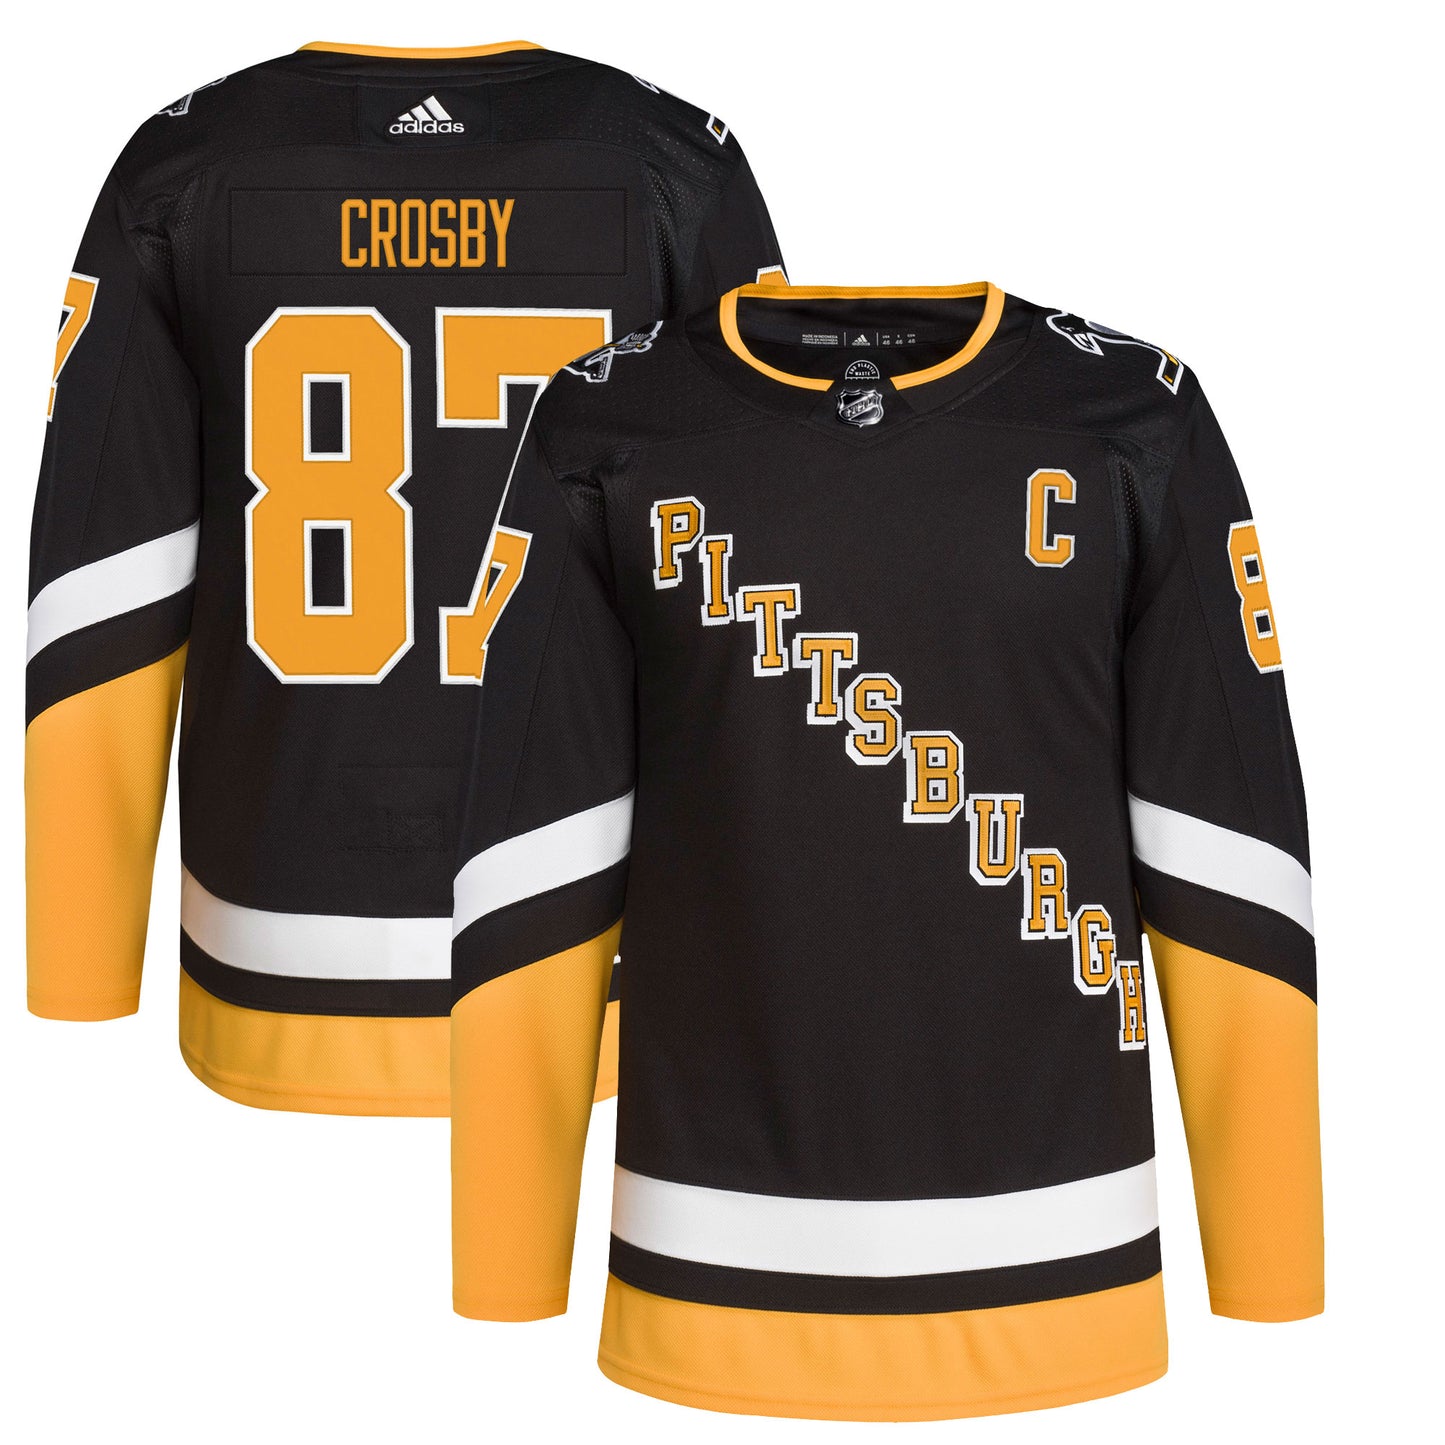 Sidney Crosby Pittsburgh Penguins adidas 2021/22 Alternate Primegreen Authentic Pro Player Jersey - Black